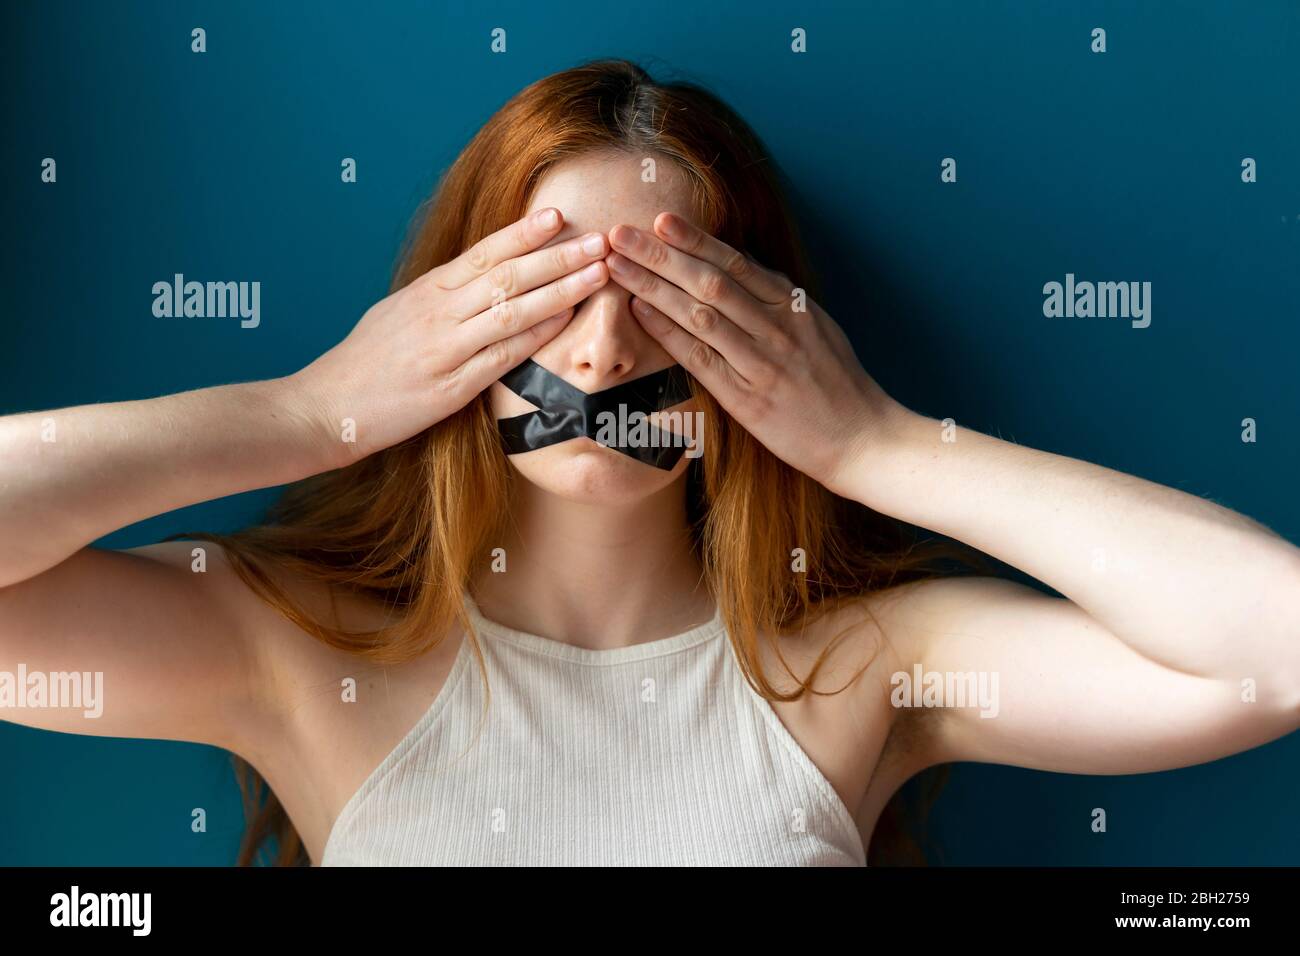 Portrait of young woman with taped mouth covering her eyes Stock Photo